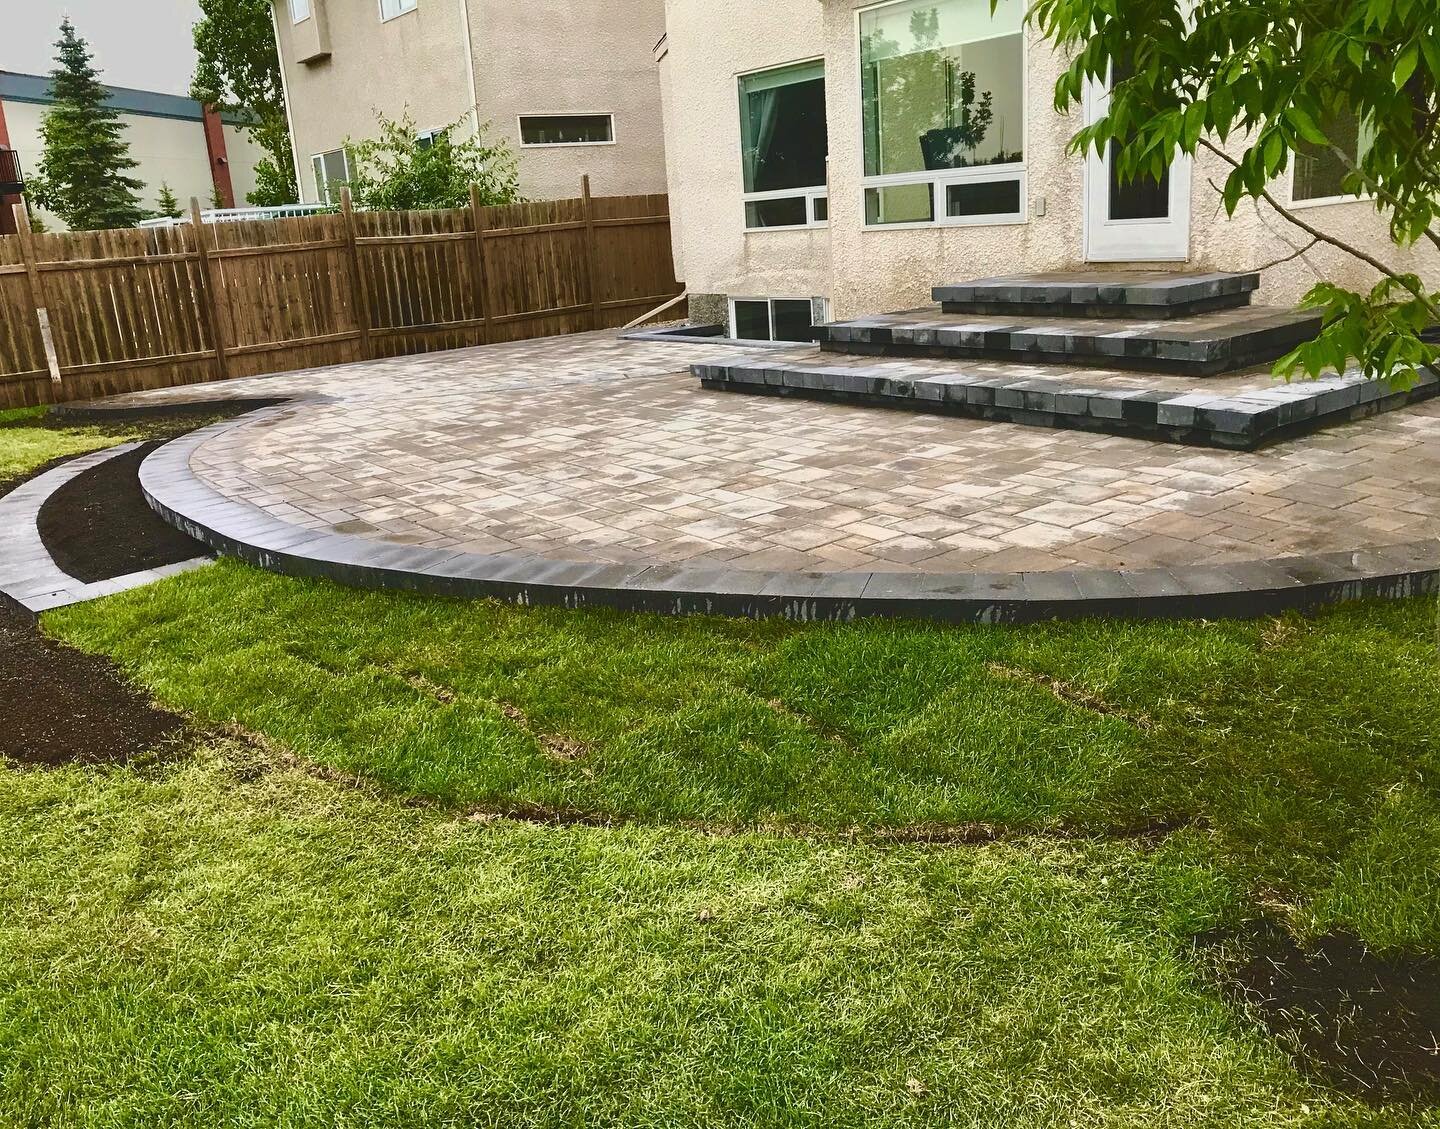 Extend your outdoor living area with a low maintenance, functional, and long lasting investment like this 1000+ sq ft Verano paver patio. 

#winnipeg #manitoba #landscape #landscaping #patio